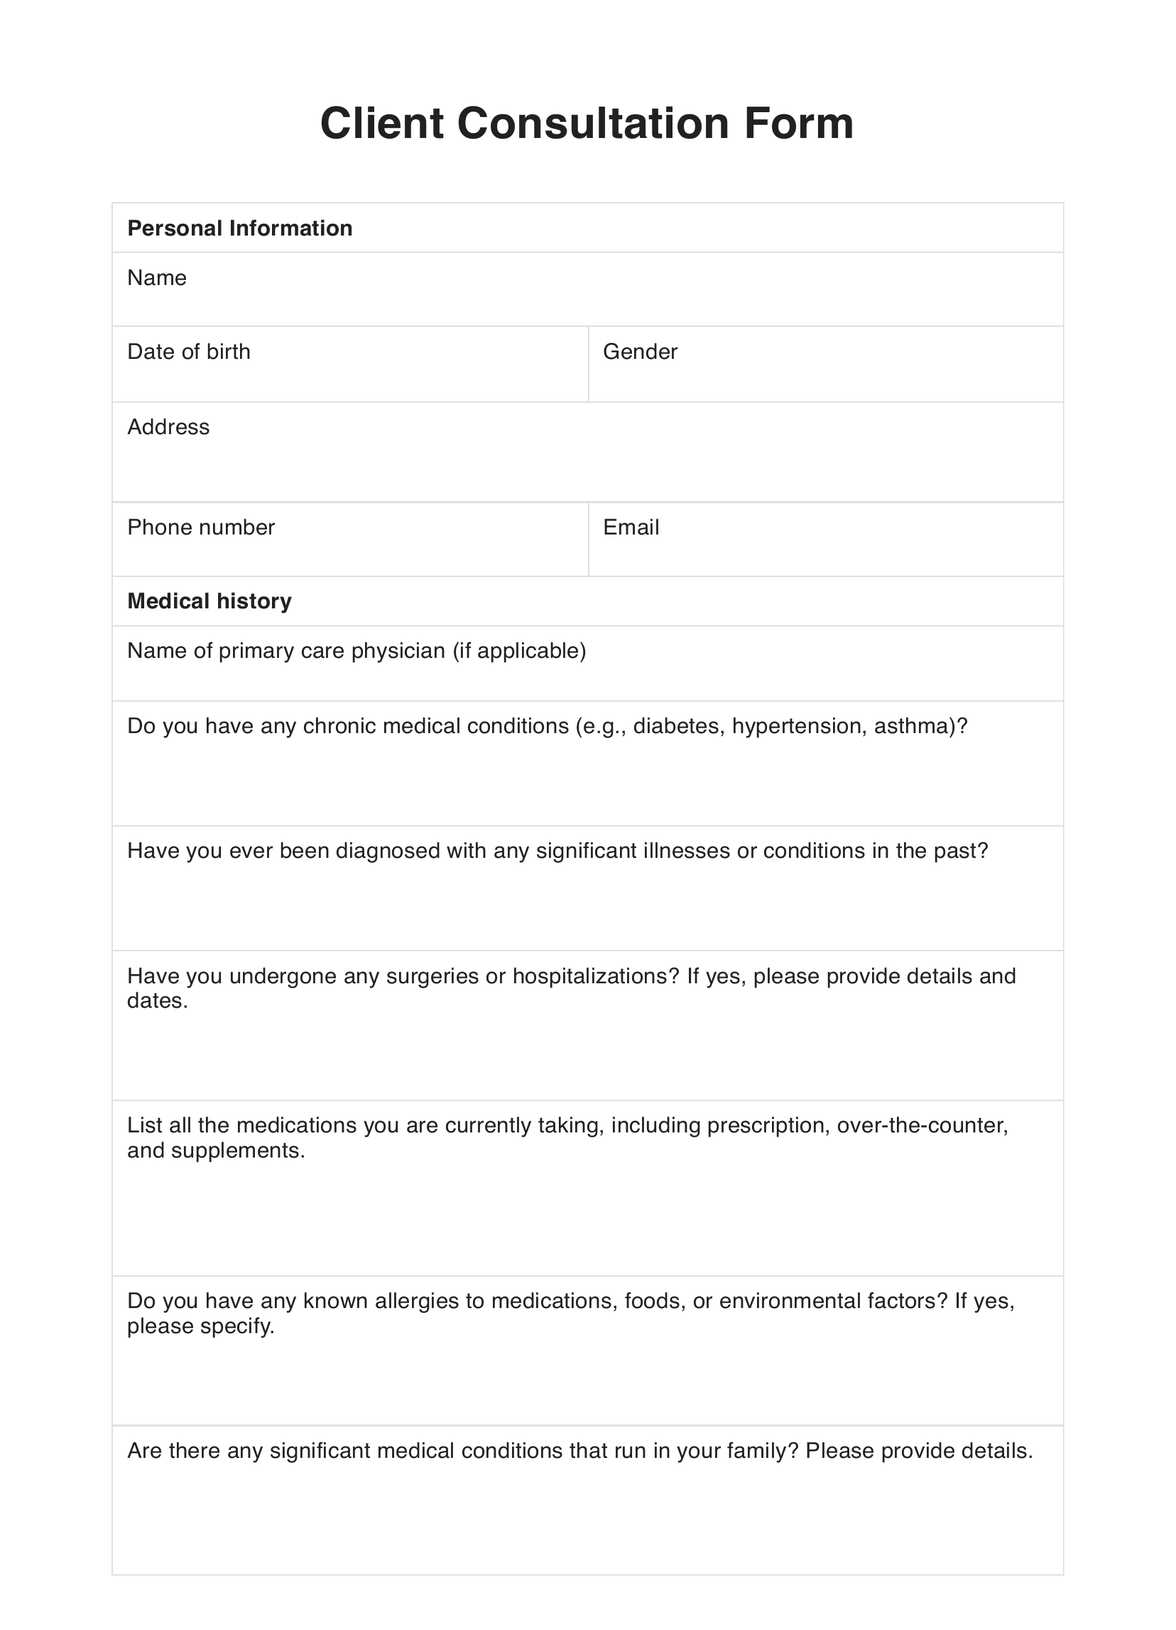 Client Consultation Forms PDF Example